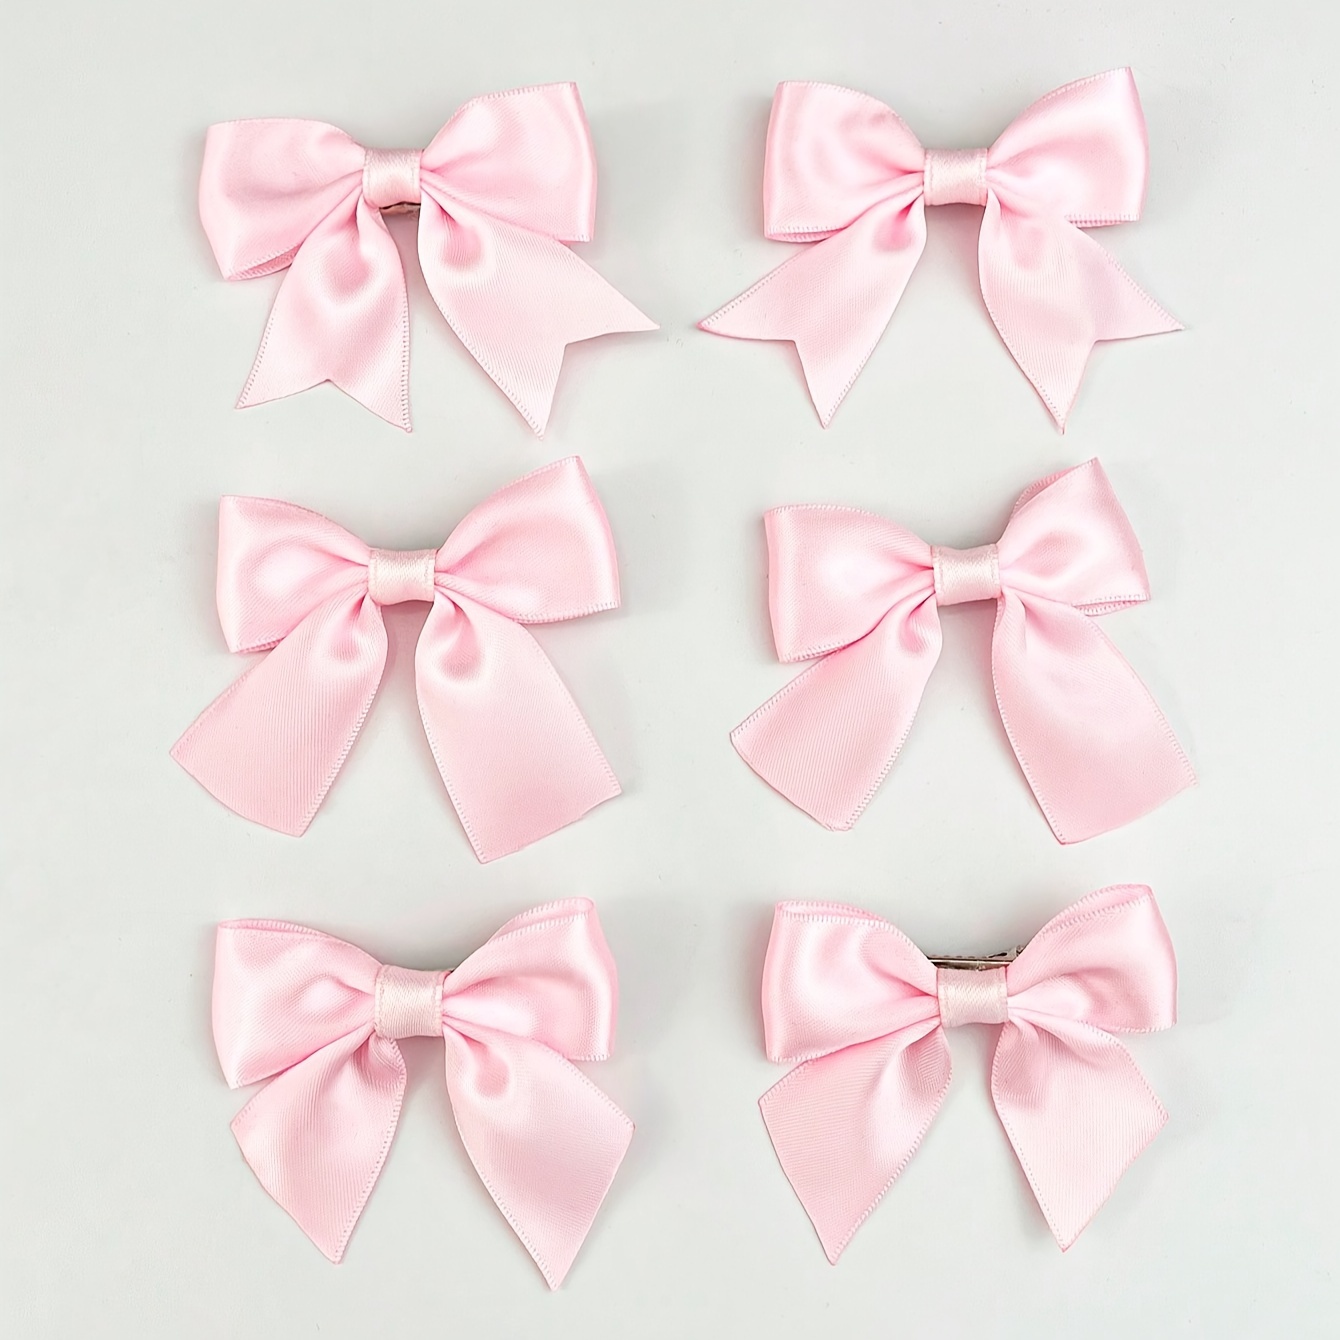 

6-piece Elegant Solid Color Satin Bow Hair Clips - Sweet Ballet Style Duckbill Barrettes For Women And Girls, Perfect For Parties & Gifts